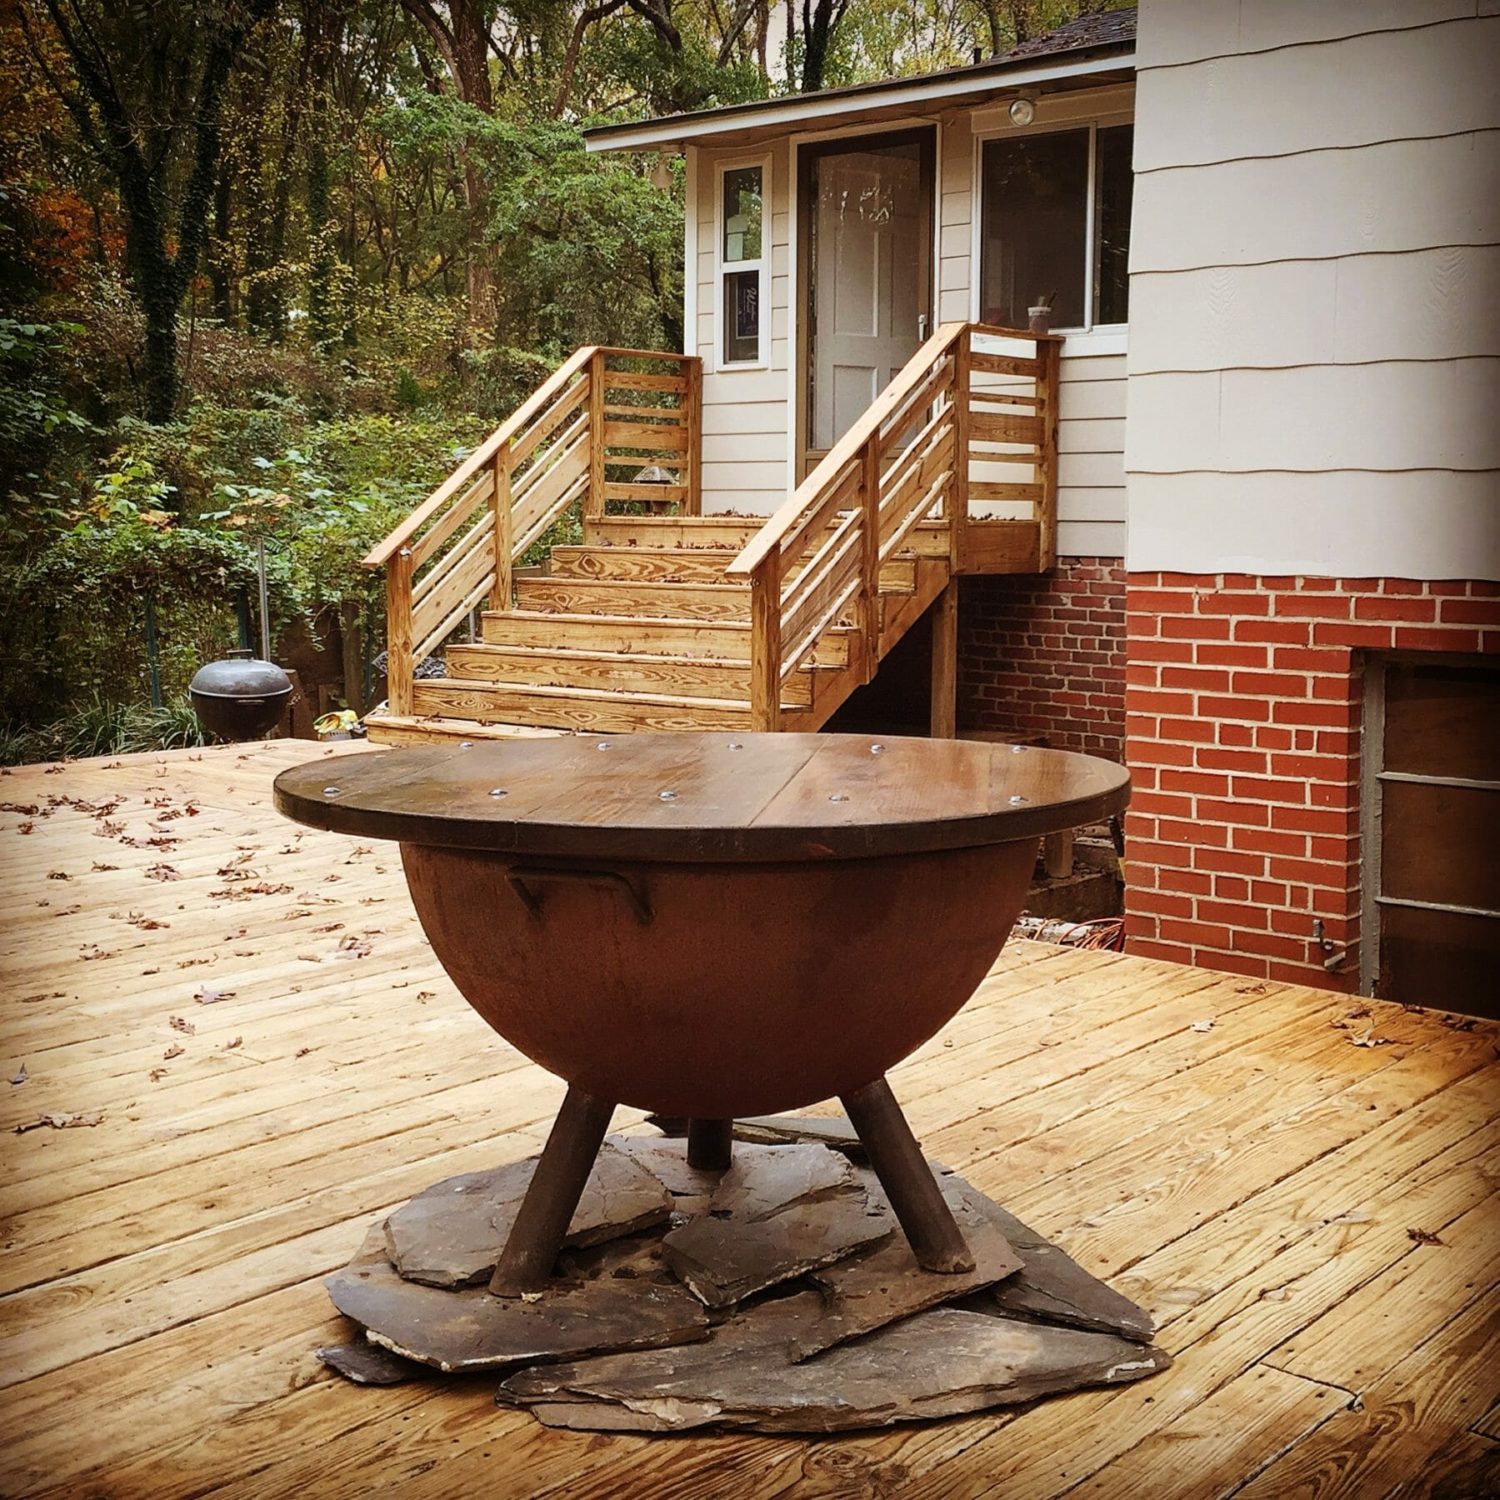 Can I Safely Use a S&S Fire Pit on My Deck? - S&S Fire Pits - Our Steel